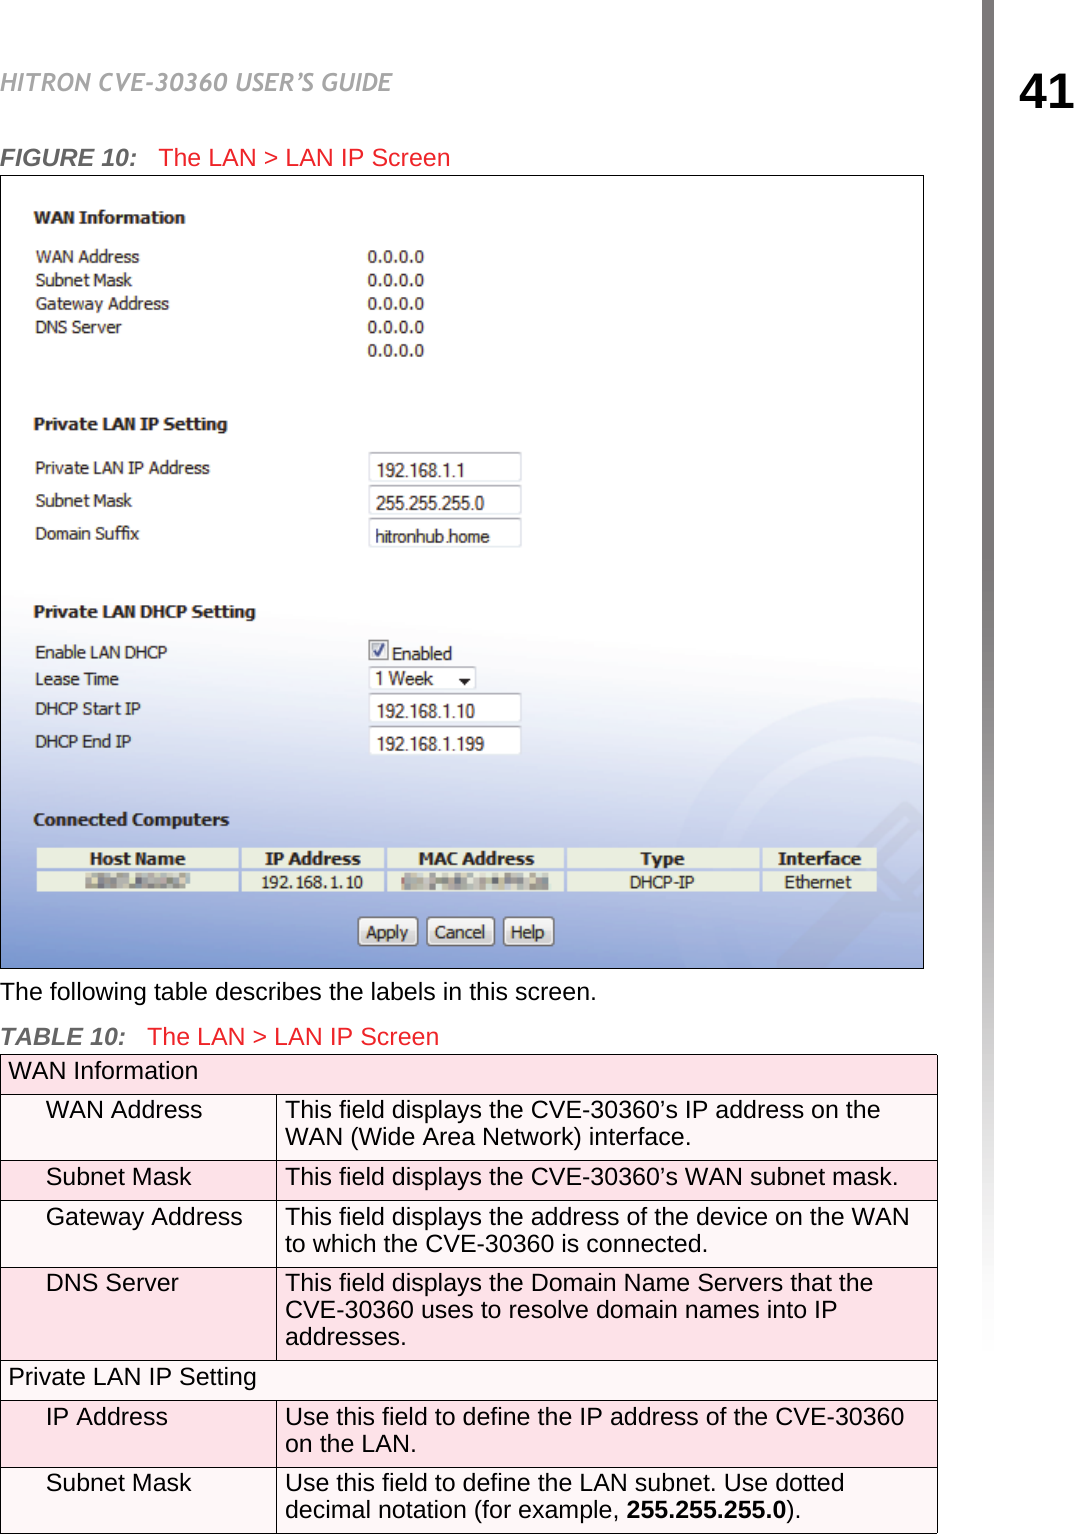 41HITRON CVE-30360 USER’S GUIDELANFIGURE 10:   The LAN &gt; LAN IP ScreenThe following table describes the labels in this screen.TABLE 10:   The LAN &gt; LAN IP Screen WAN InformationWAN Address This field displays the CVE-30360’s IP address on the WAN (Wide Area Network) interface.Subnet Mask This field displays the CVE-30360’s WAN subnet mask.Gateway Address This field displays the address of the device on the WAN to which the CVE-30360 is connected.DNS Server This field displays the Domain Name Servers that the CVE-30360 uses to resolve domain names into IP addresses.Private LAN IP SettingIP Address Use this field to define the IP address of the CVE-30360 on the LAN.Subnet Mask Use this field to define the LAN subnet. Use dotted decimal notation (for example, 255.255.255.0).